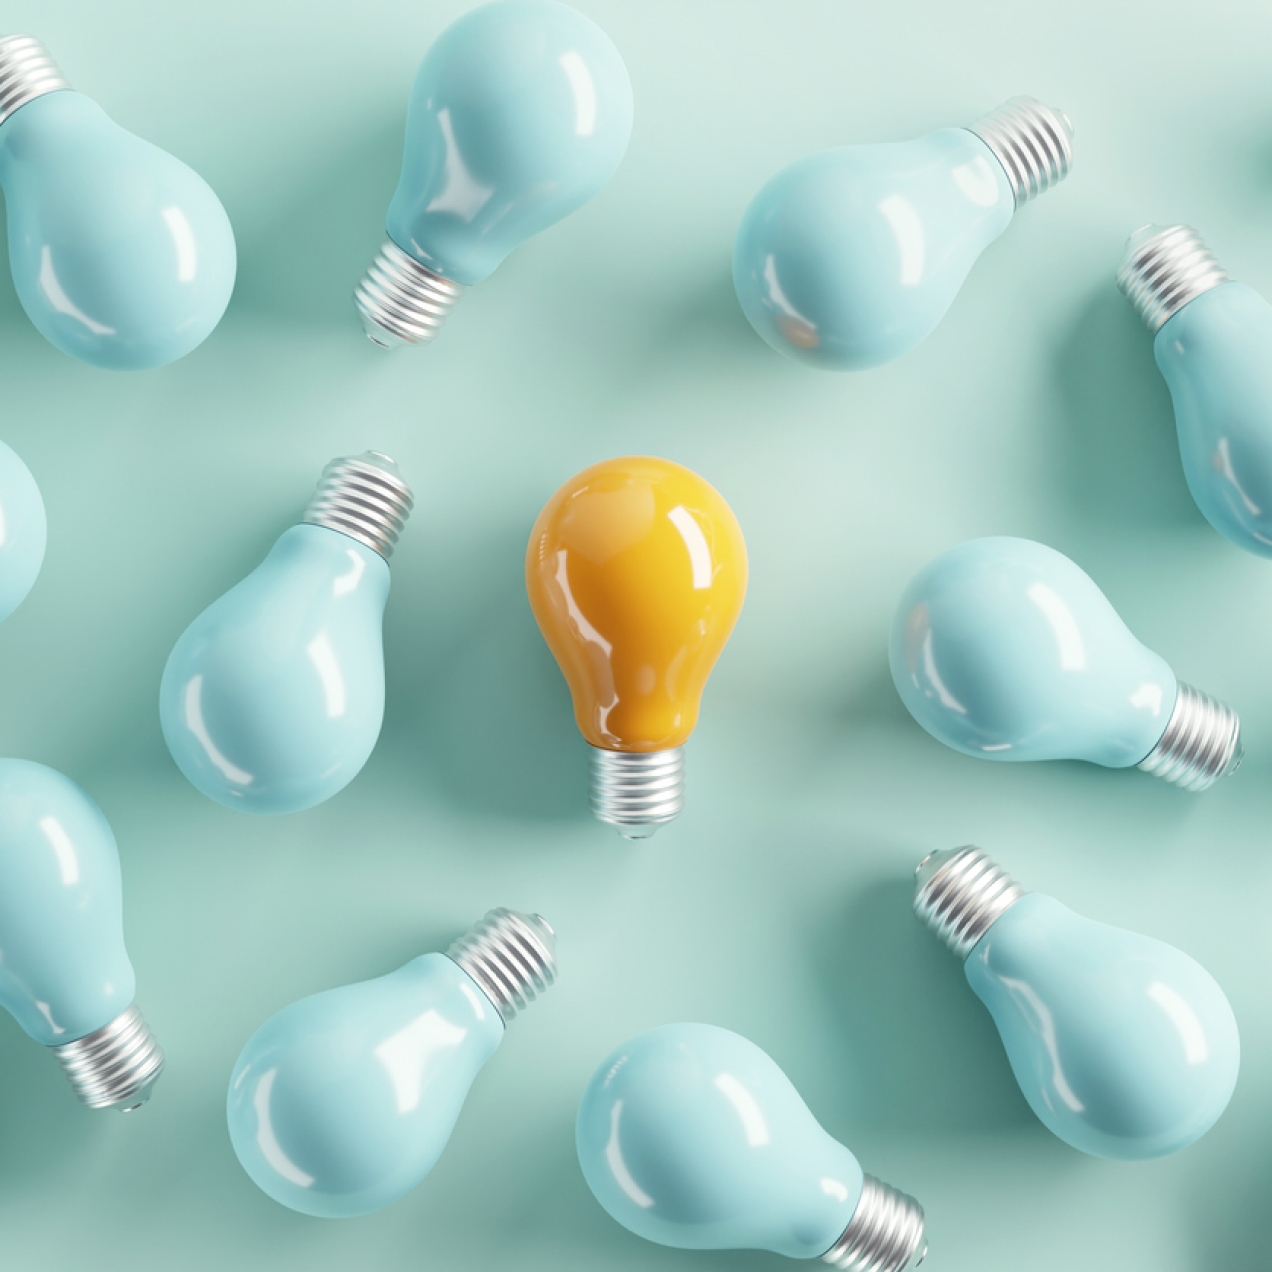 A bird's eye view of a yellow tinted light bulb laid flat on a teal background, surrounded by 15 turquoise-tinted bulbs